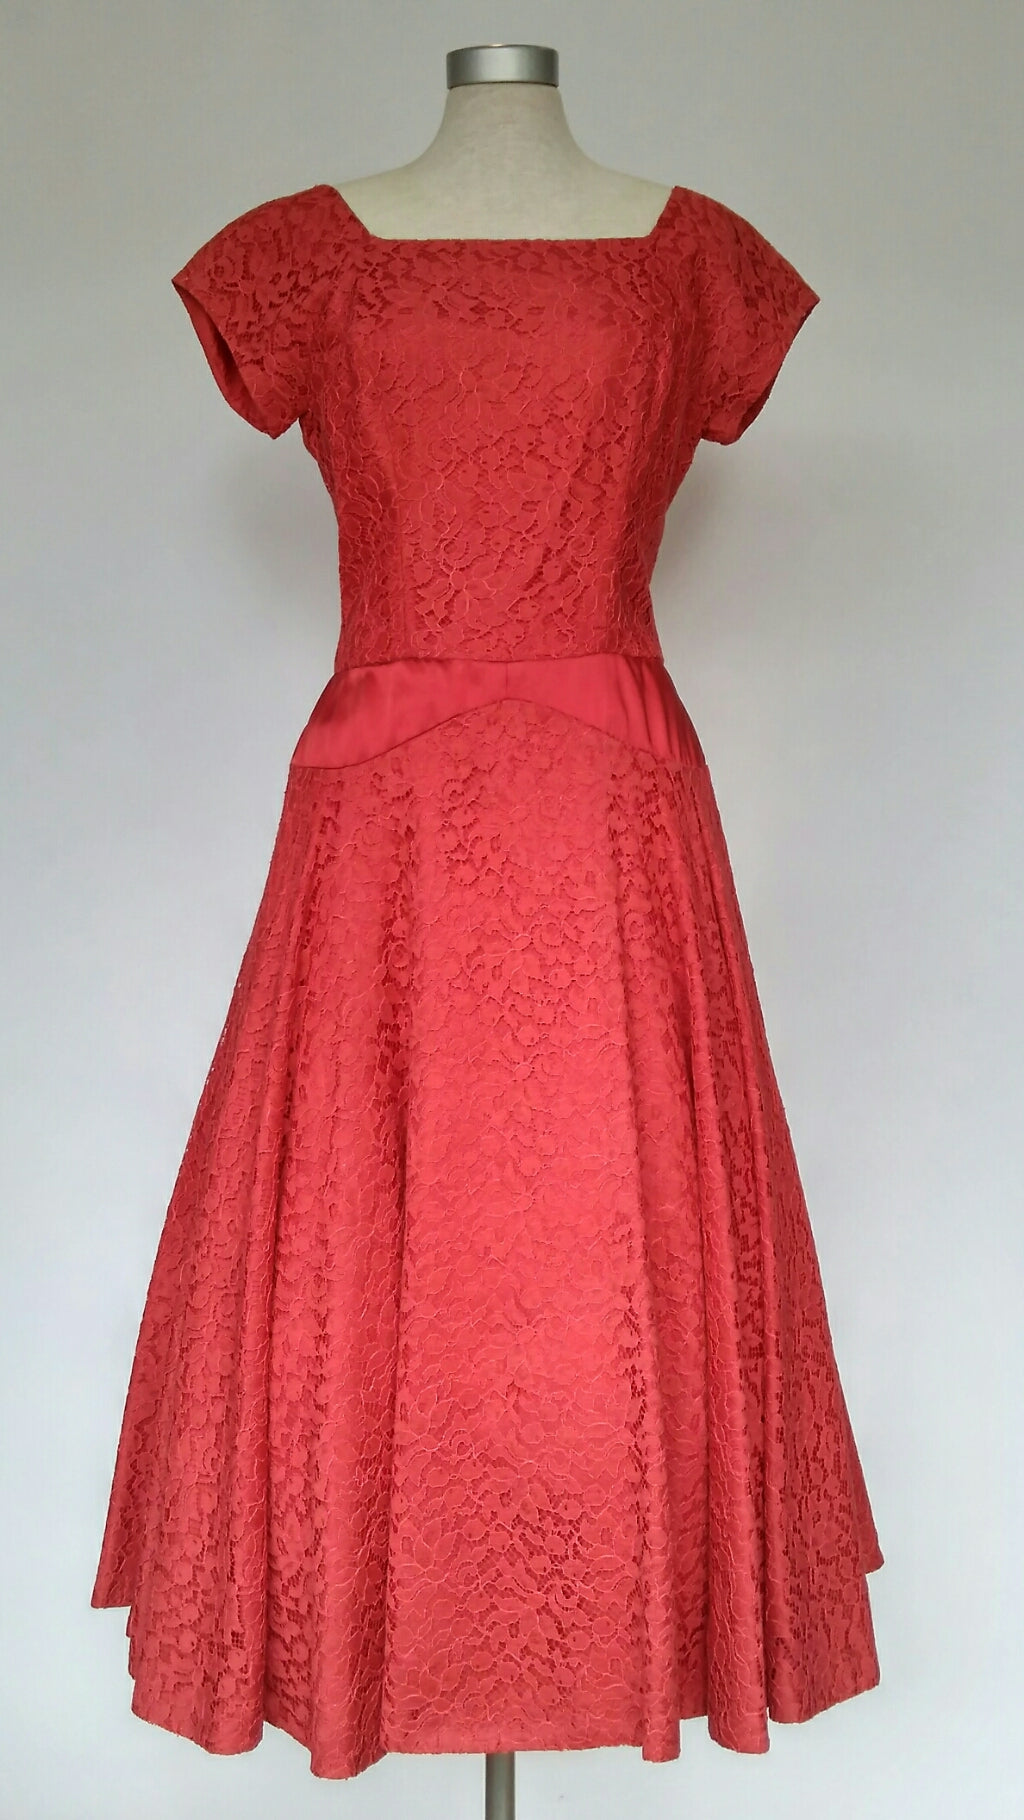 Red Lace Dress 1950s